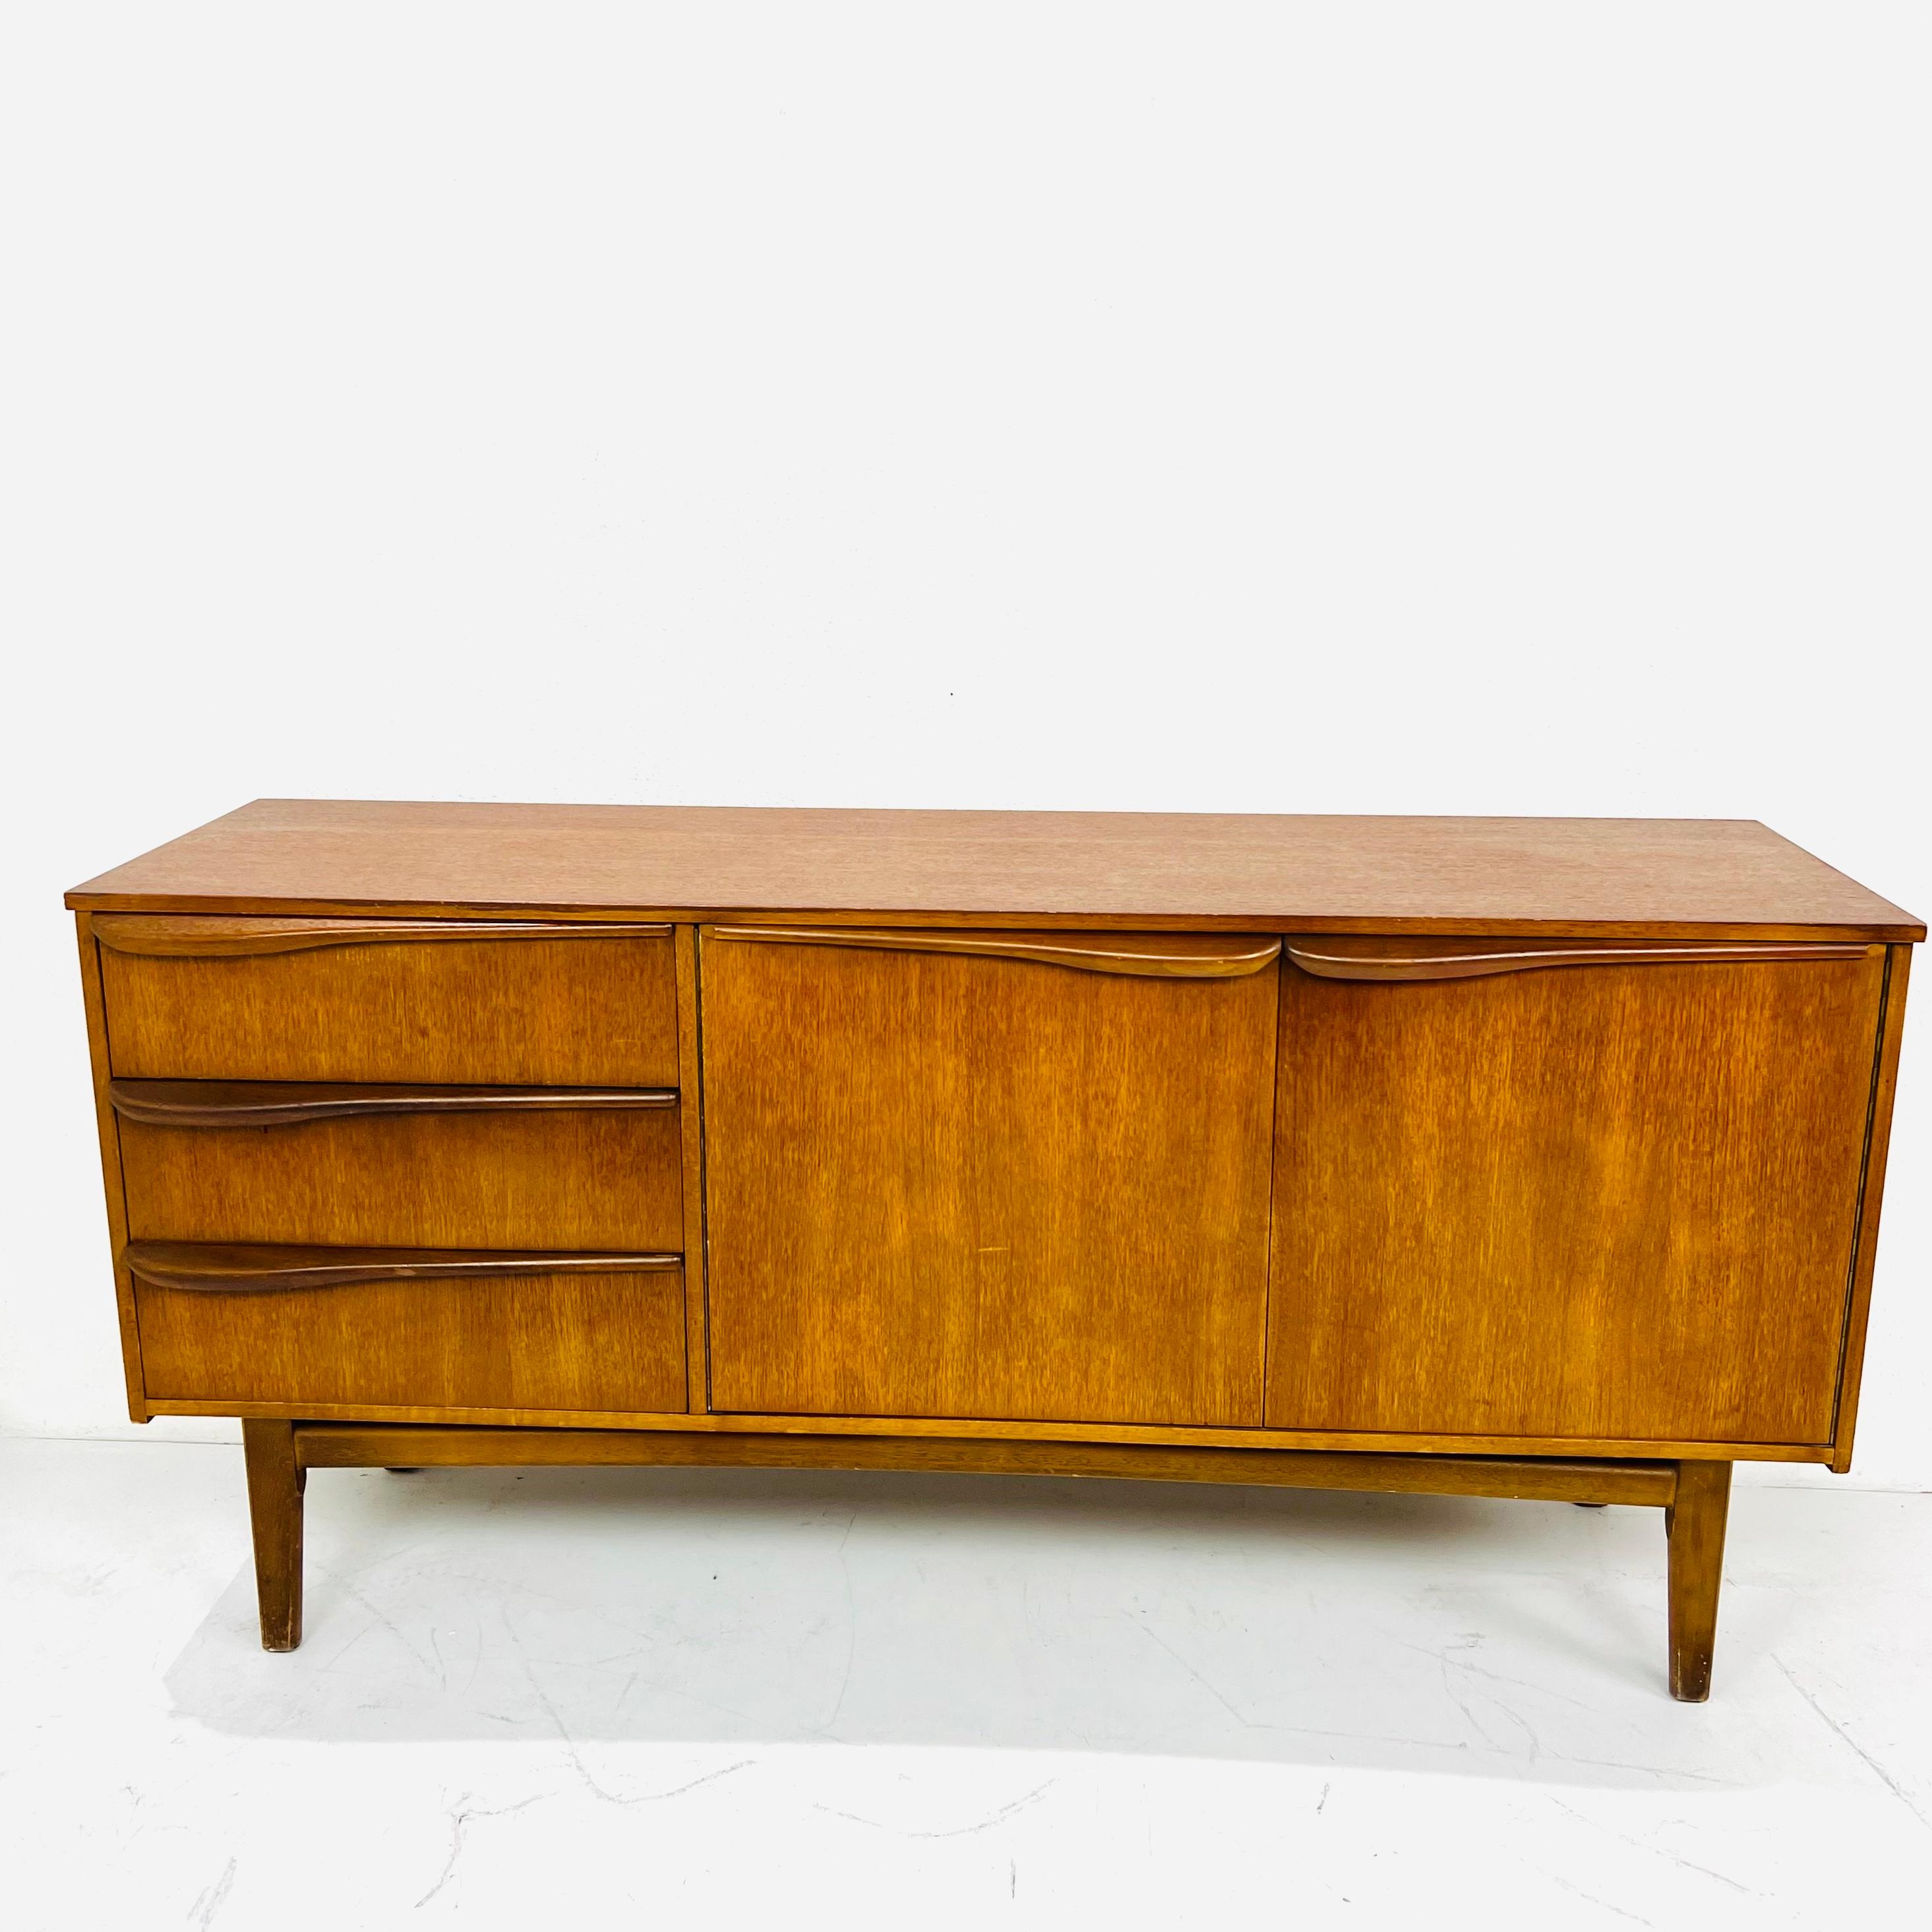 Sculptural Mid Century Modern teak Credenza / Sideboard. Ample storage space with three drawers and two spacious shelving areas. The hand-pulls are set asymmetrically on the drawers which adds to the funky styling of this piece.
Very good vintage